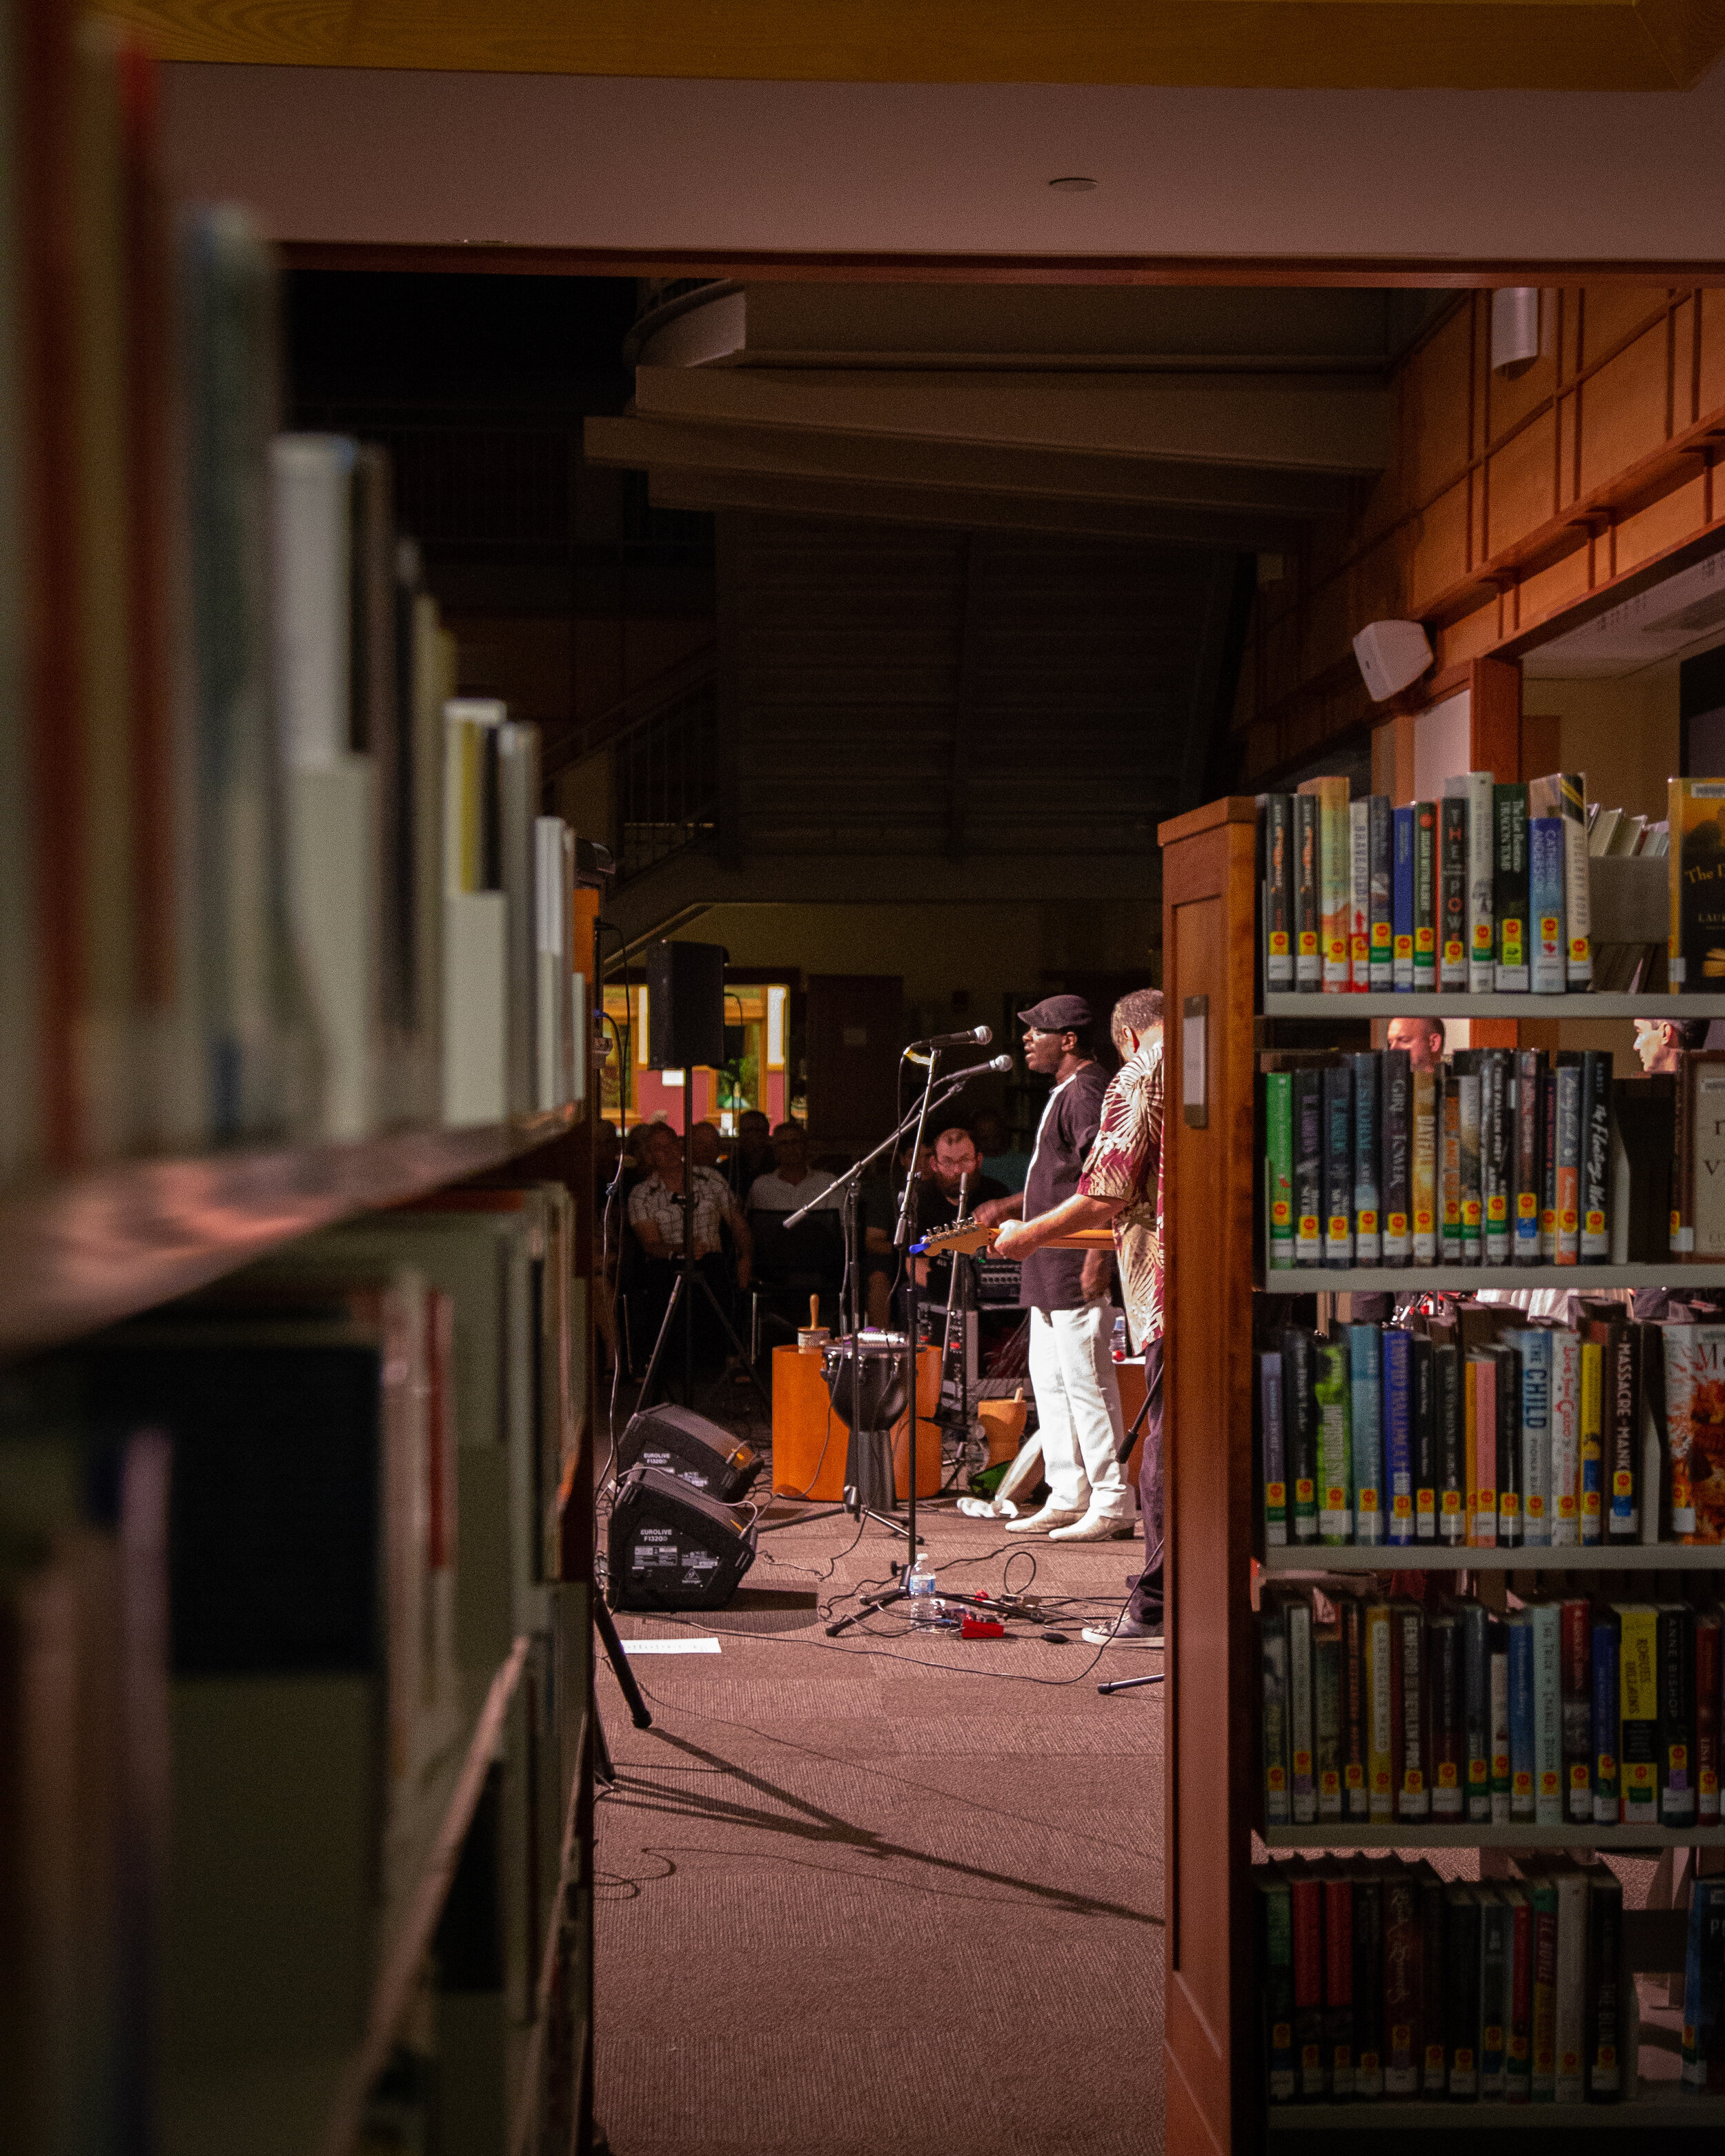  Photograph of musicians singing and playing instruments, taken through the library book stacks 